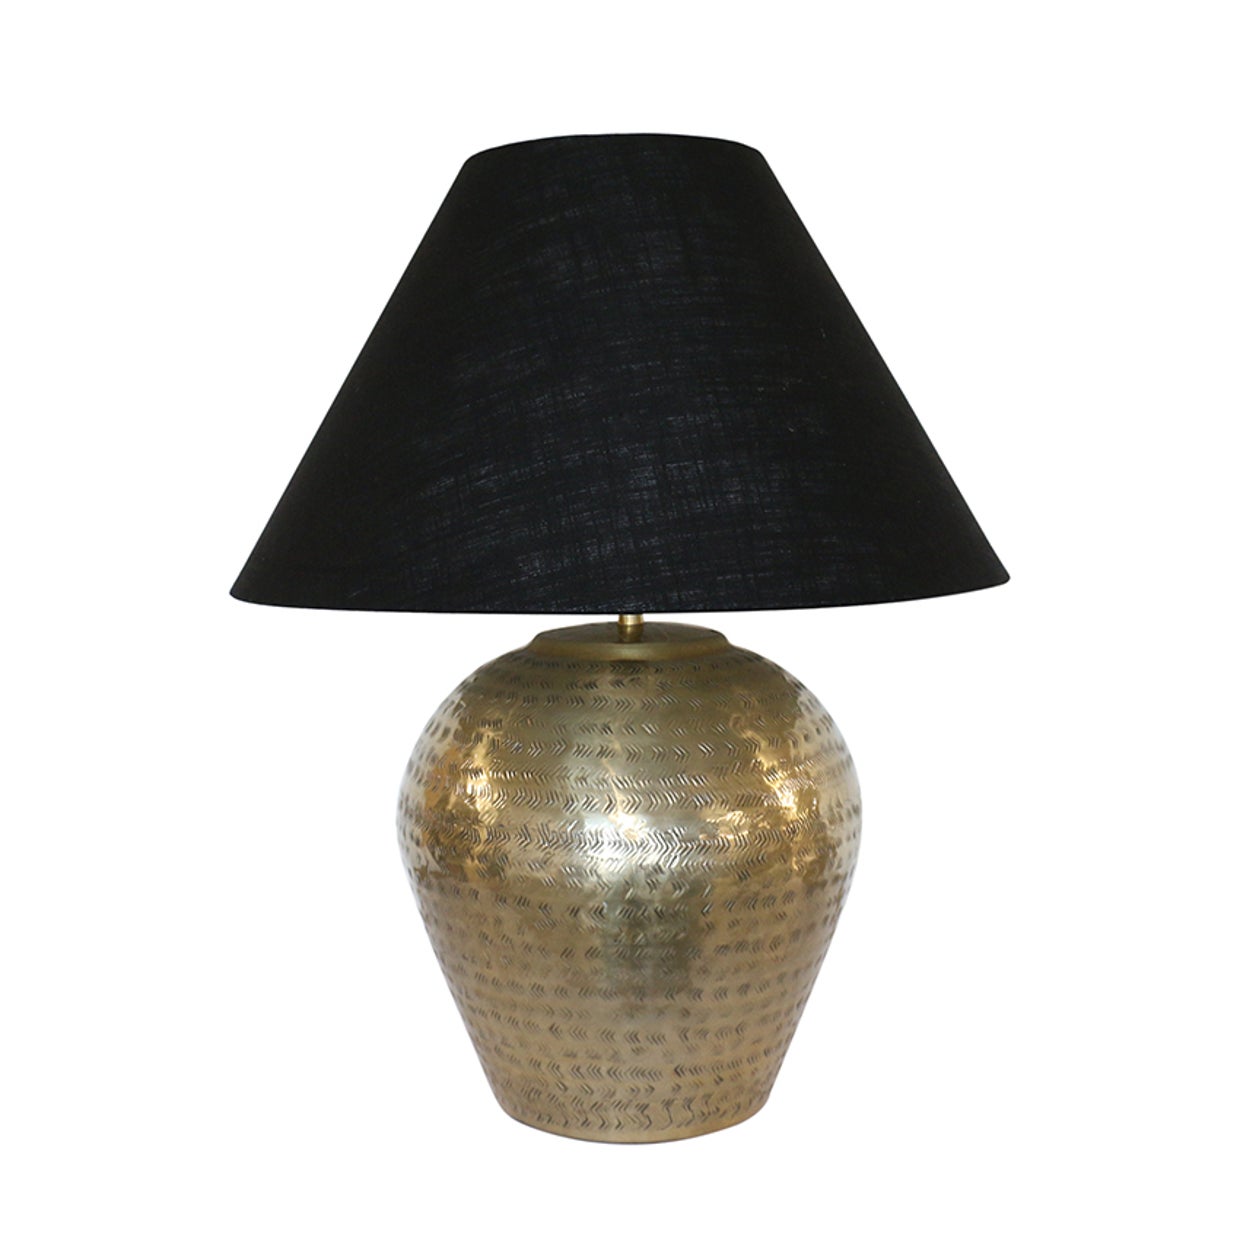 Ravello Etched Lamp Base in Antique Brass Finish